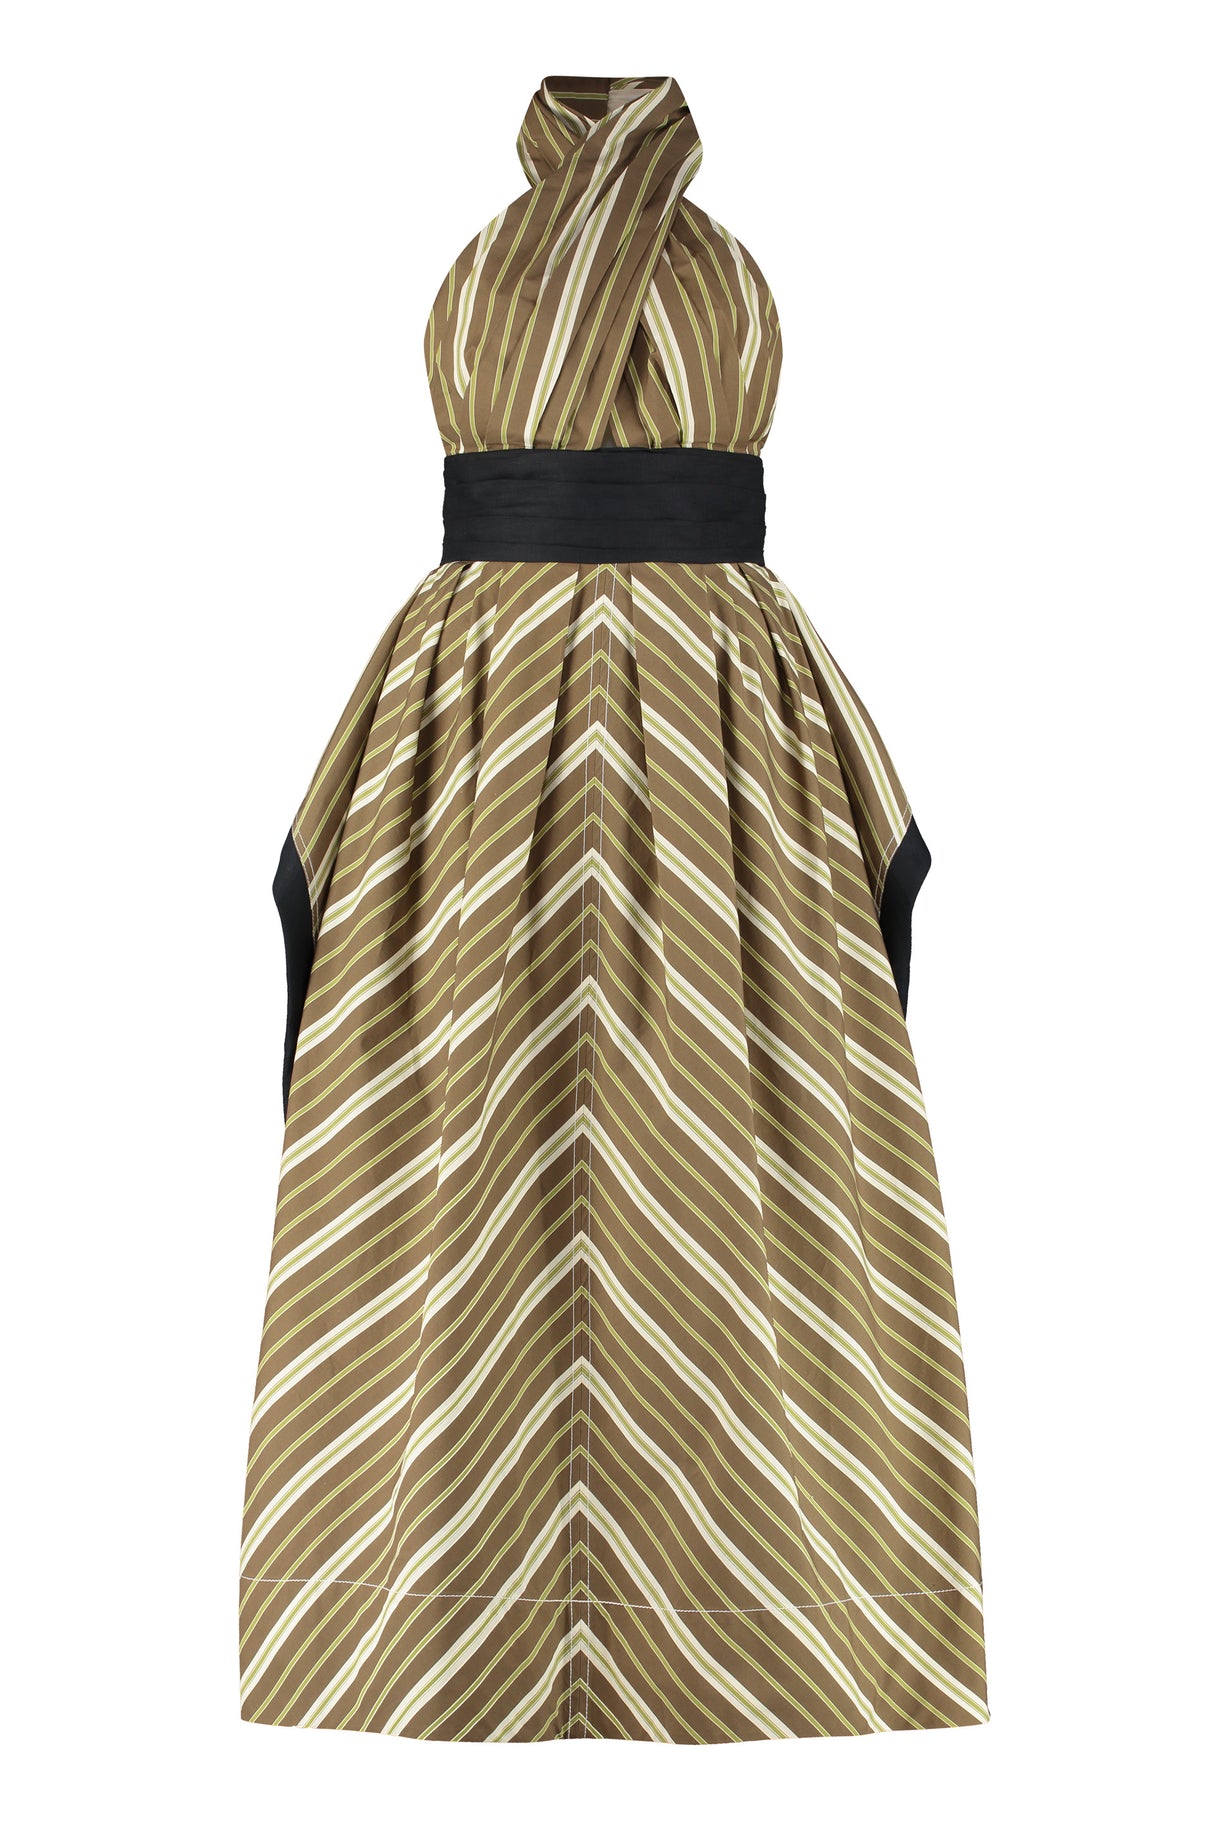 TORY BURCH Striped Maxi Dress with Contrasting Bands and Back Panel for Women